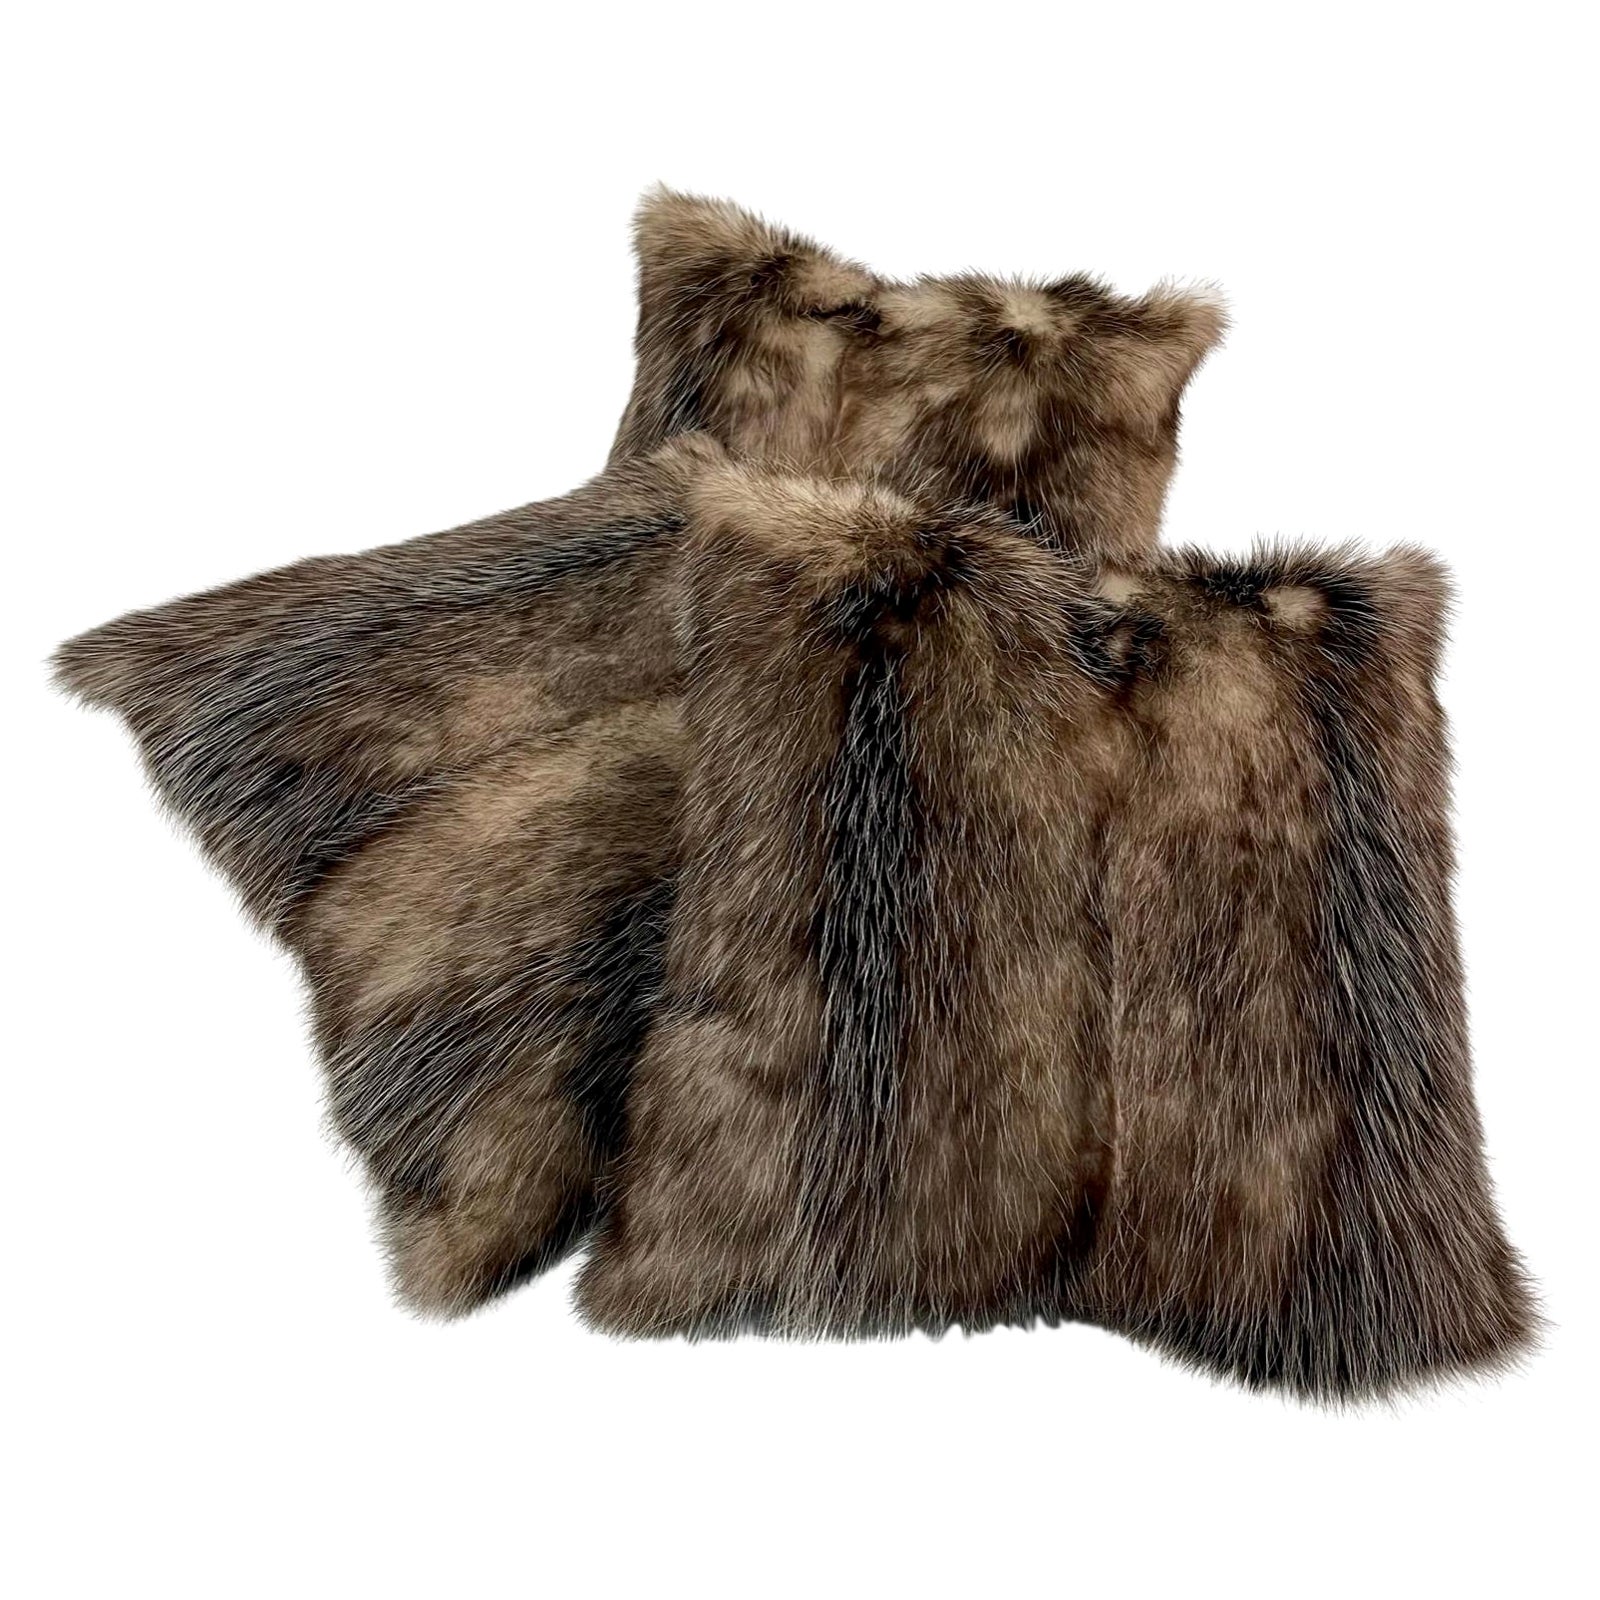 Set of 3 Fur Cushion with Cotton / Down Feather Insert, Opossum   For Sale